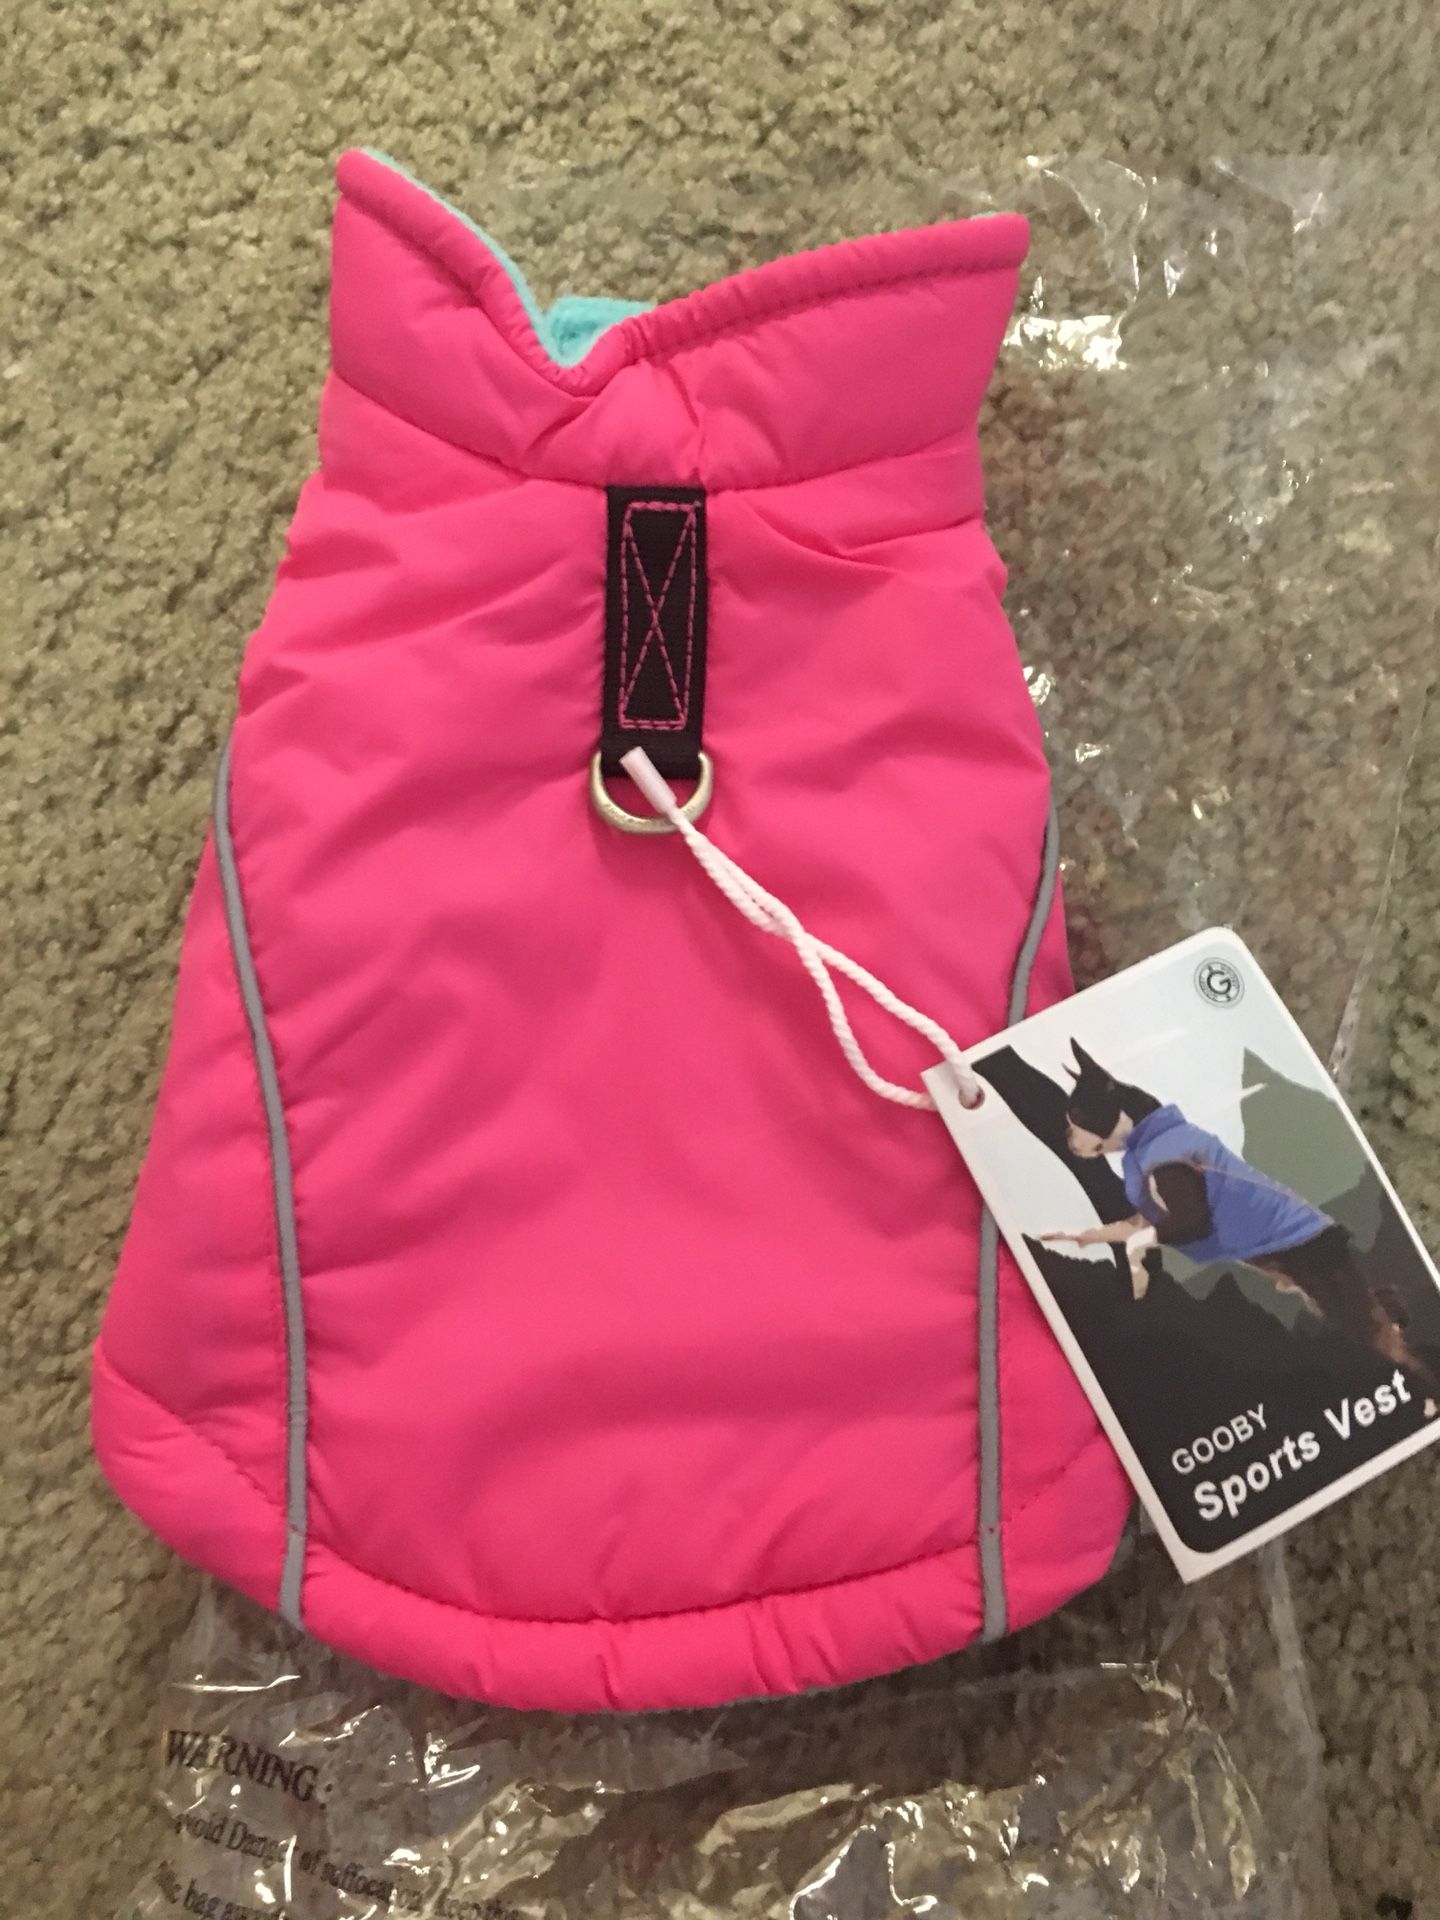 Brand new in packaging Gooby sport and “calm down” vest XS for cats or dogs